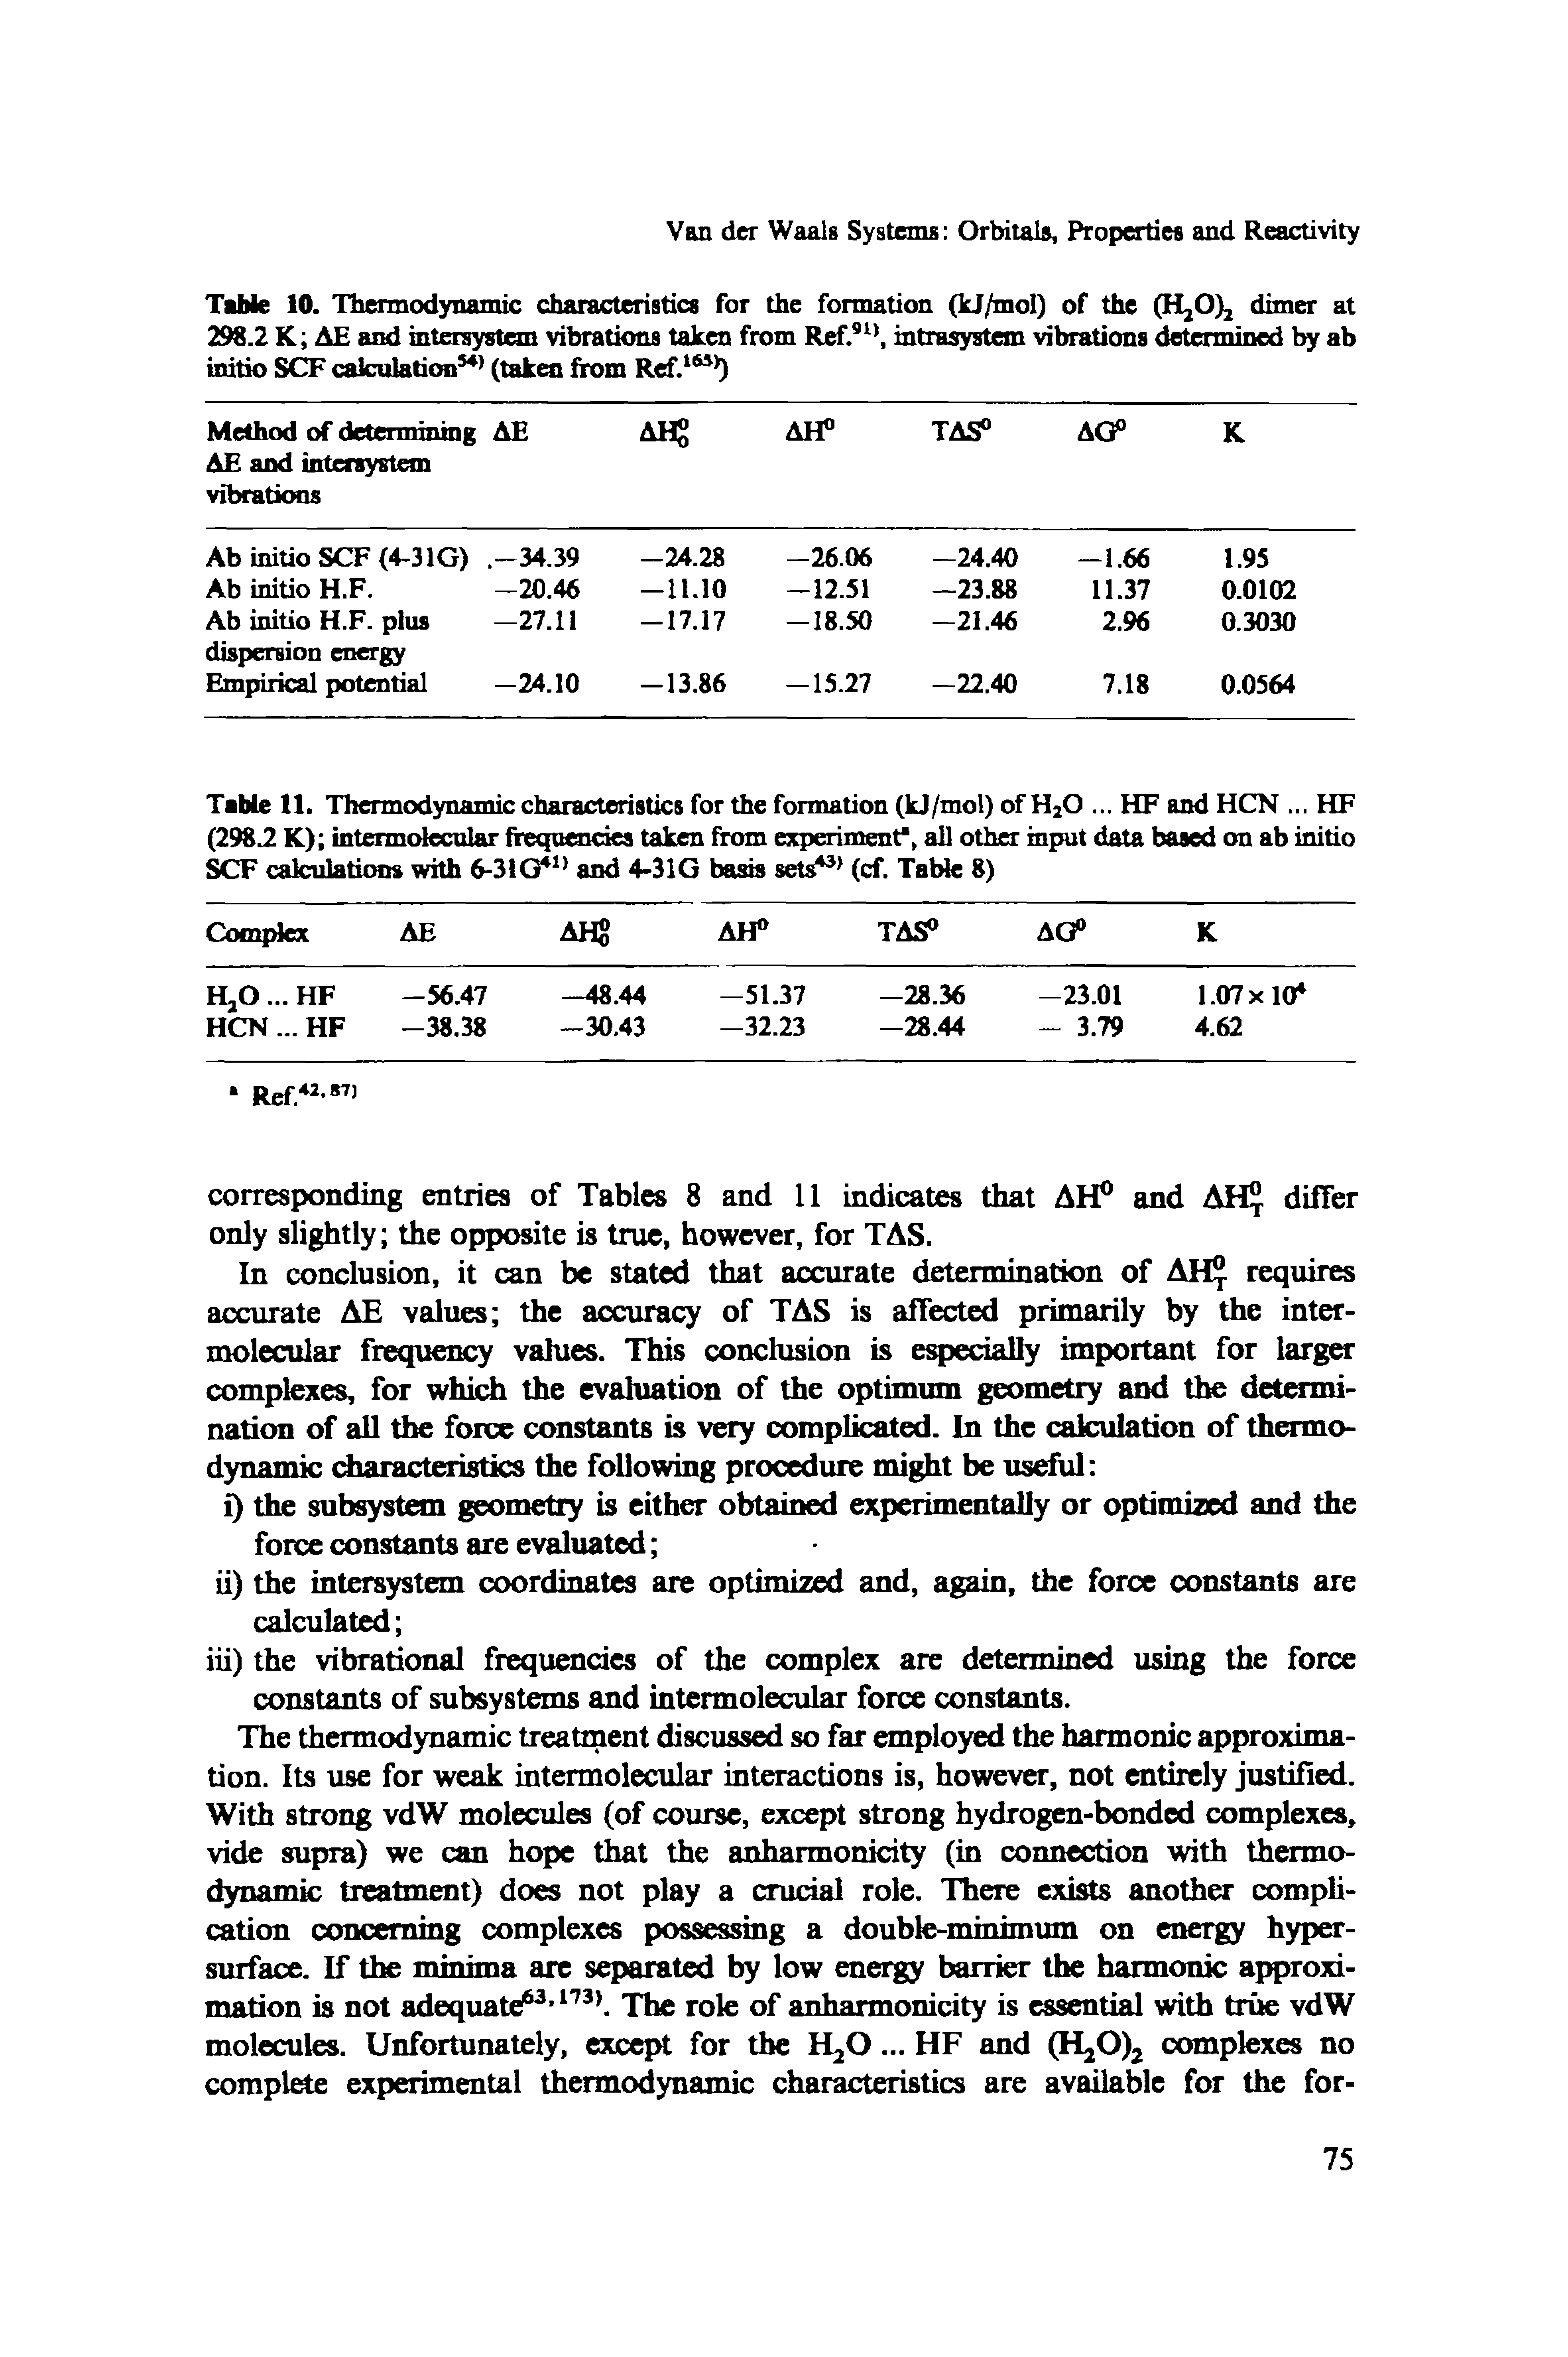 Table 10. Thermodynamic characteristics for the formation (kj/mol) of the (H20)2 dimer at 298.2 K AE and intersystem vibrations taken from Ref. intrasystem vibrations determined by ab initio SCF calculation (taken from Rcf. )...